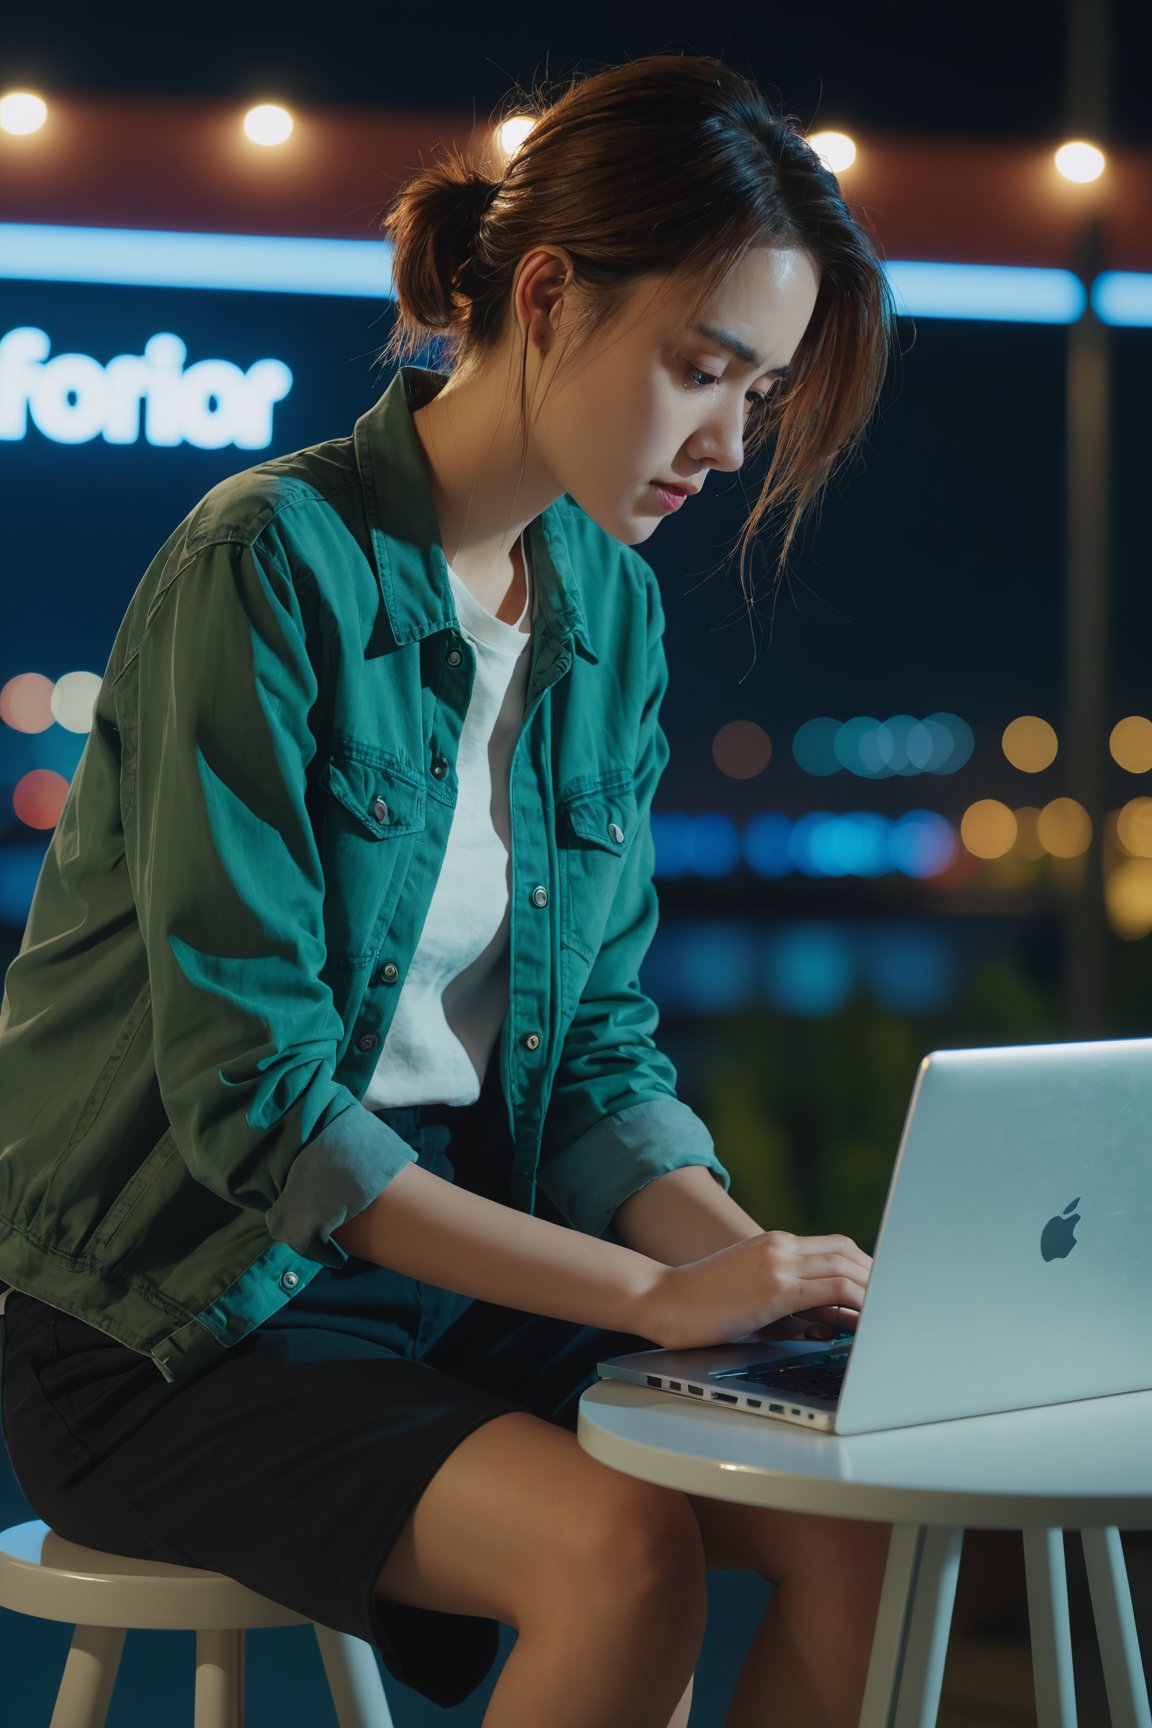 A woman in casual clothing with coiffed hair,  face slightly turned sideways,  sitting on a stool looking at a laptop on a table,  night scene,  4K,  best picture quality